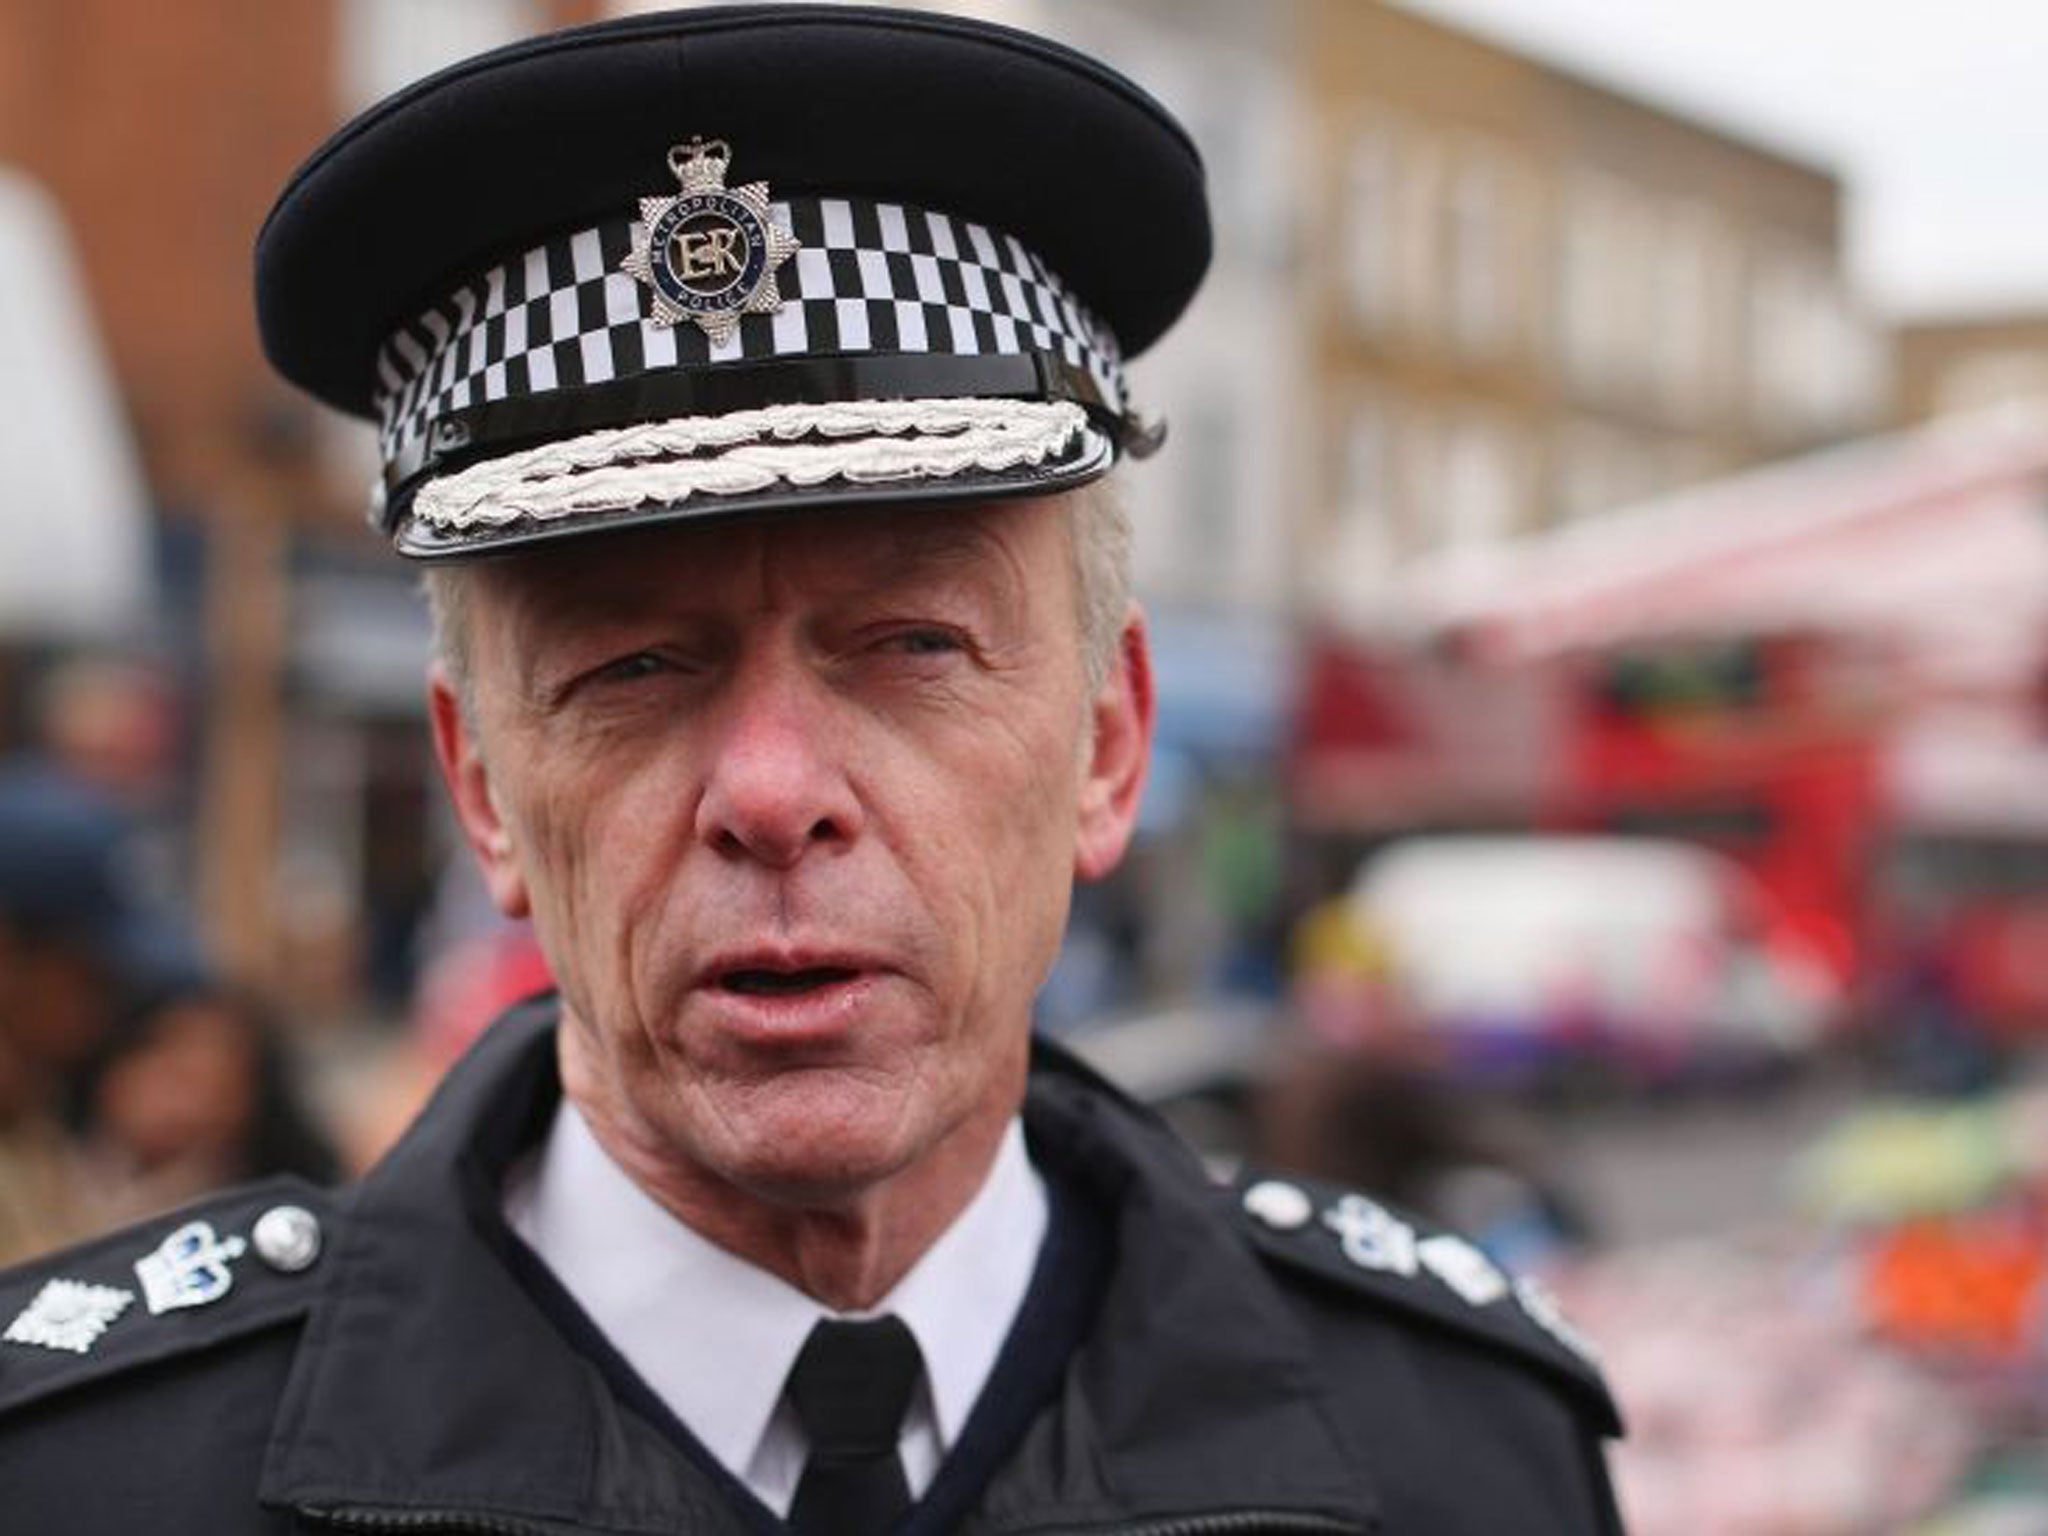 Sir Bernard Hogan-Howe, the Metropolitan Police Commissioner, has called for higher penalties for drivers who use their mobile phone at the wheel